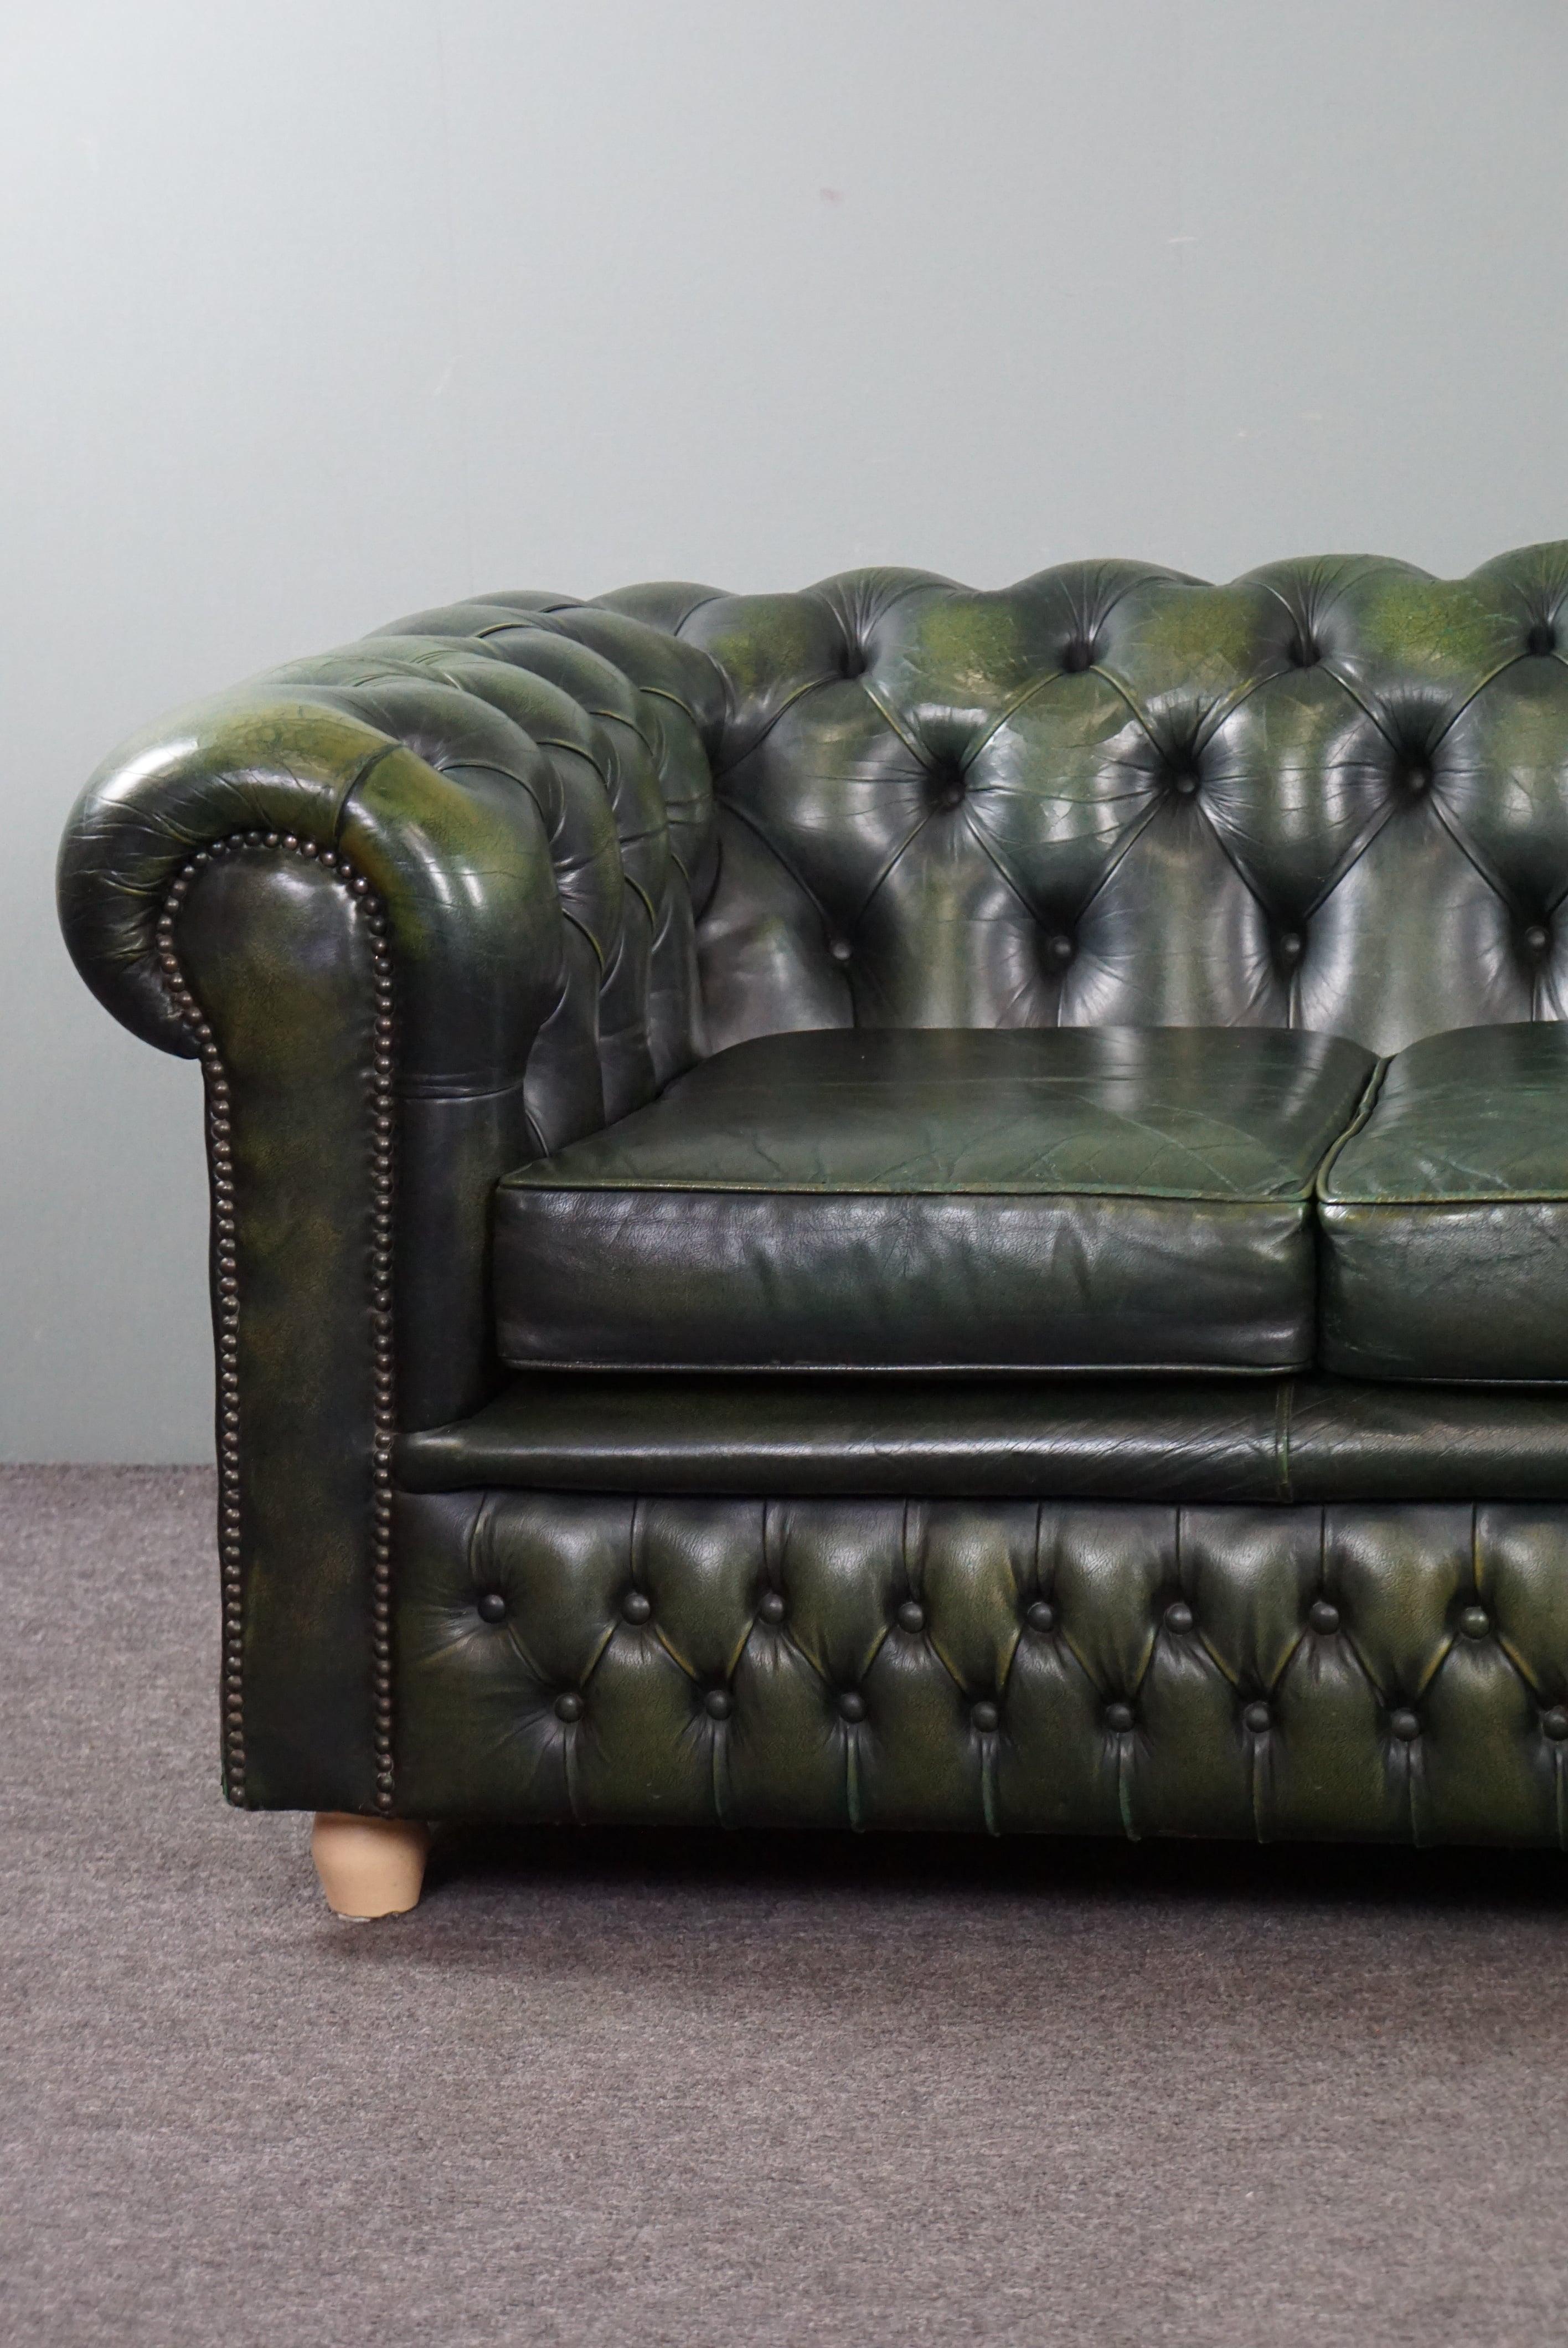 Beautifully colored spacious green cow leather Chesterfield sofa, 3.5 seater 1